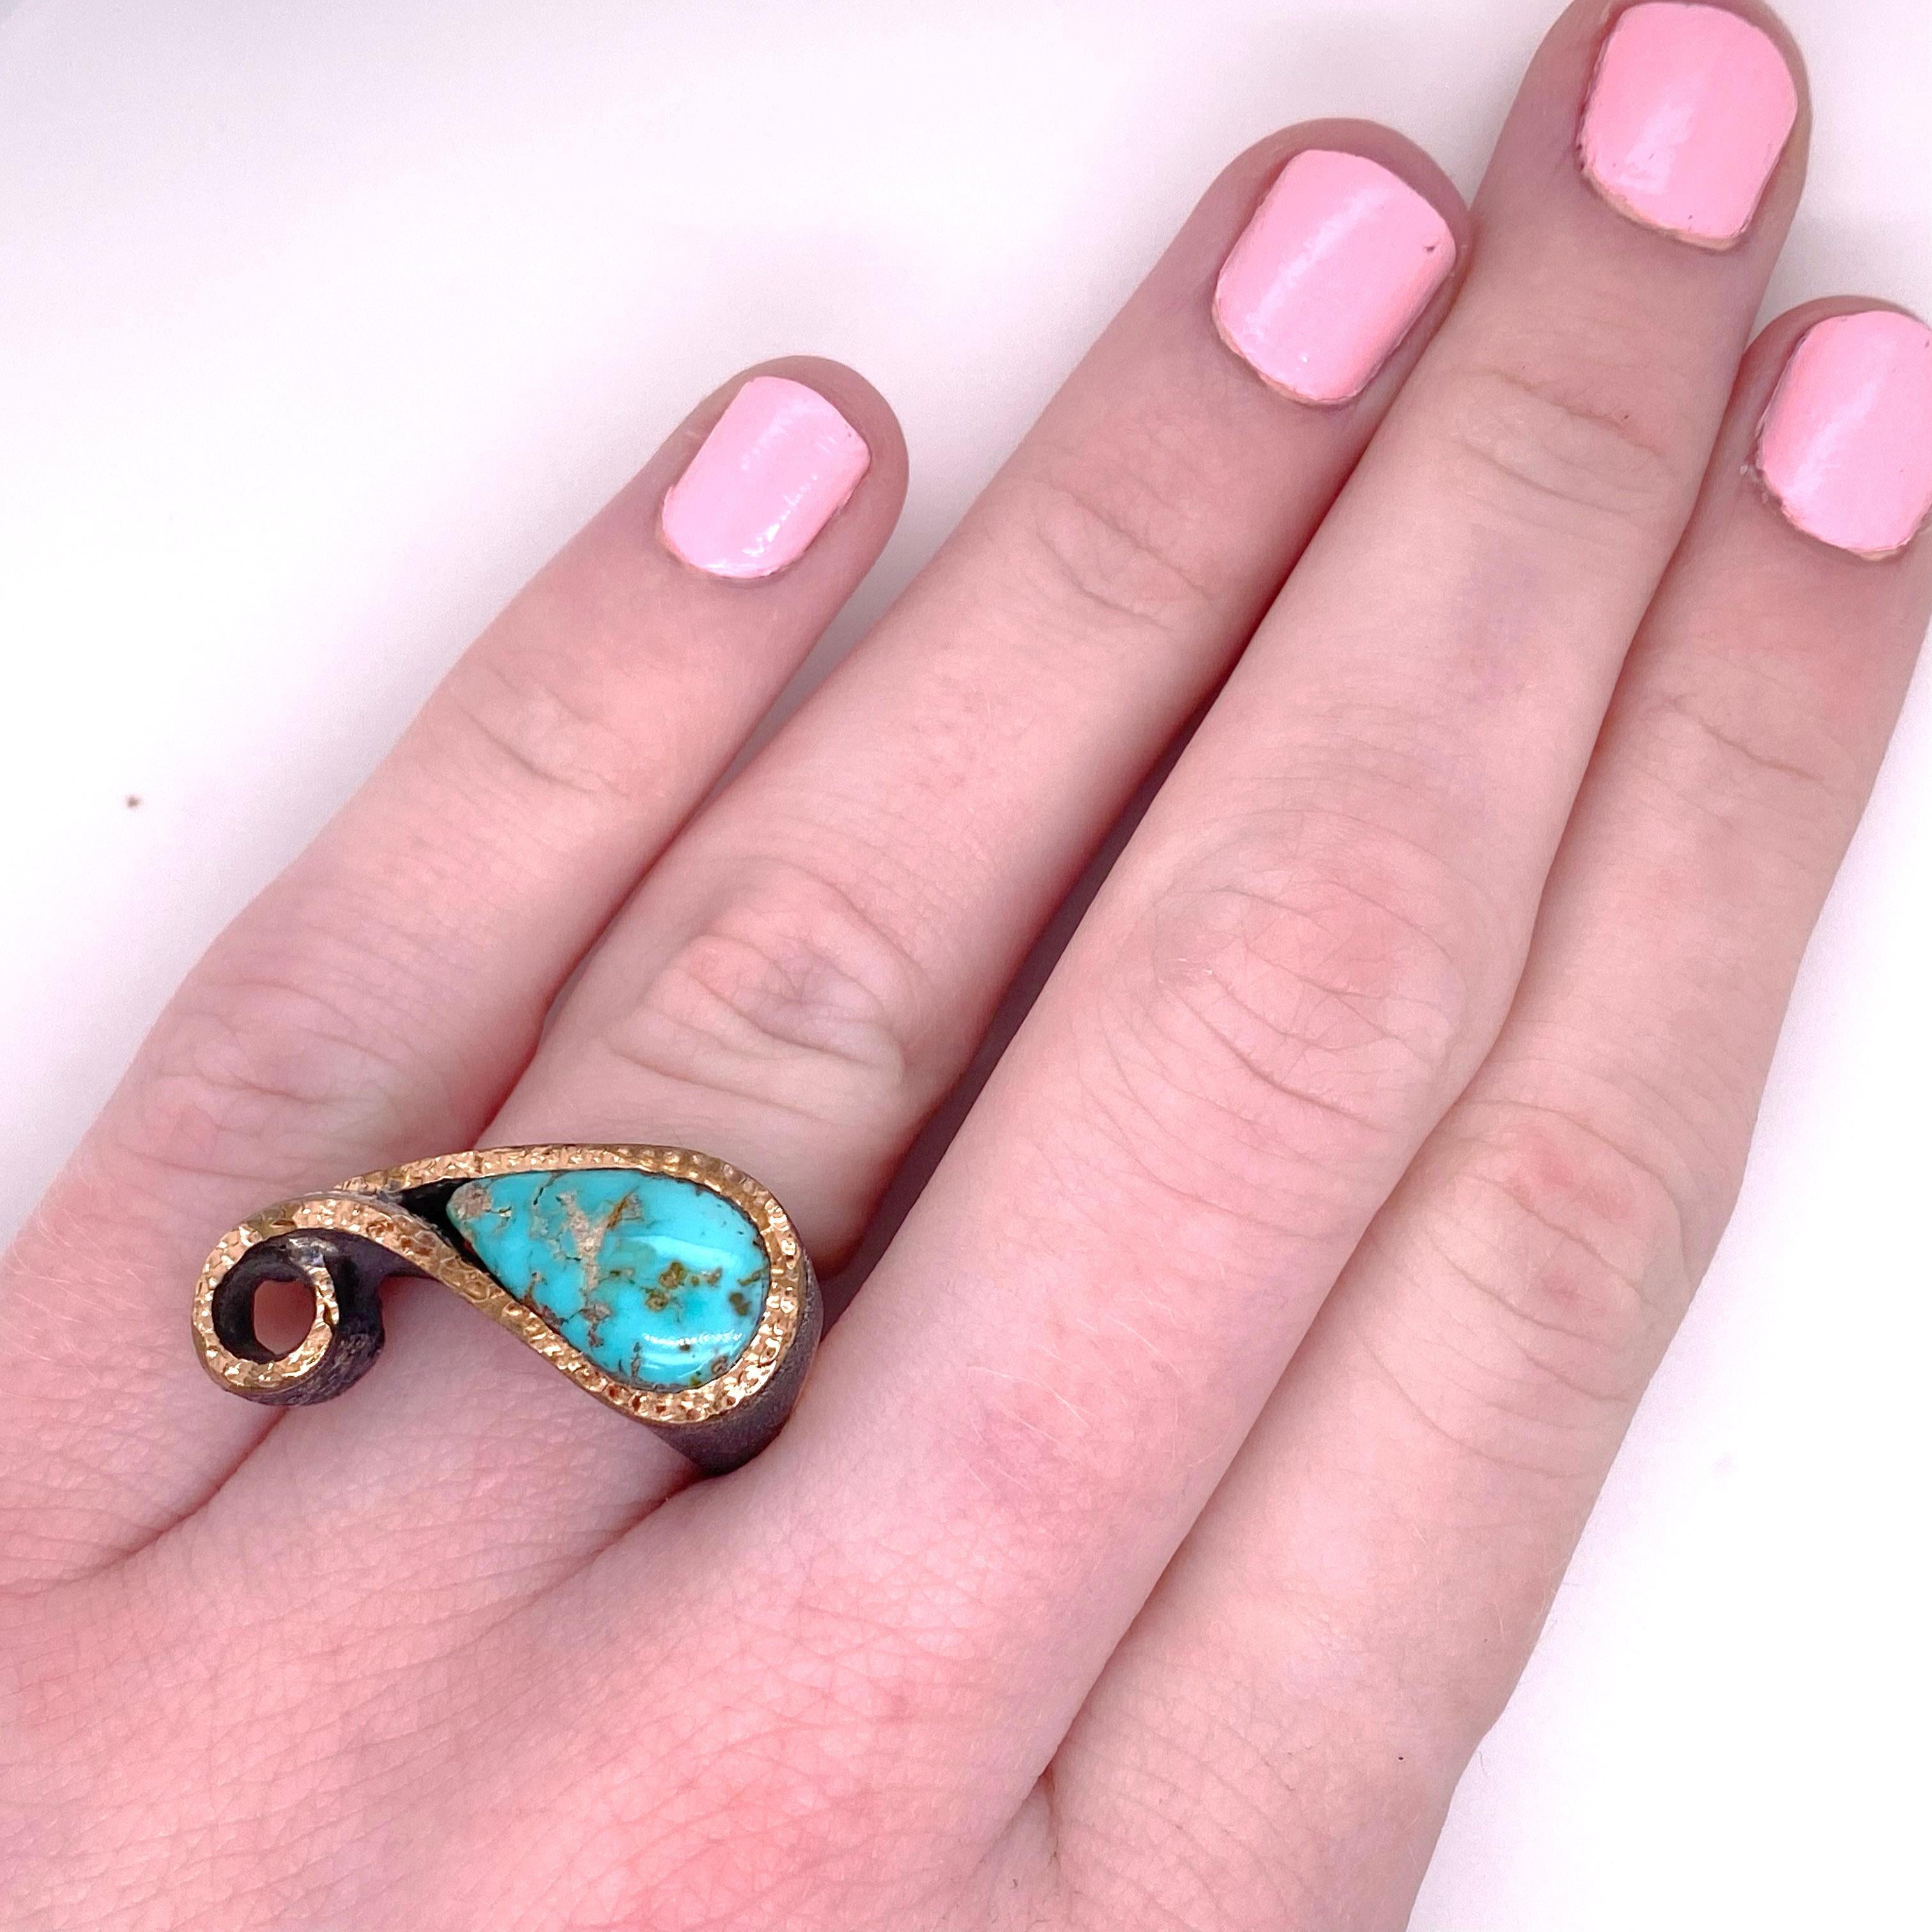 This turquoise ring is a pear shaped horizontal design that is very unique! It is called a knuckle ring because the silver is convexed next to the finger and is very comfortable to wear! The beautiful turquoise gemstone is natural and has a